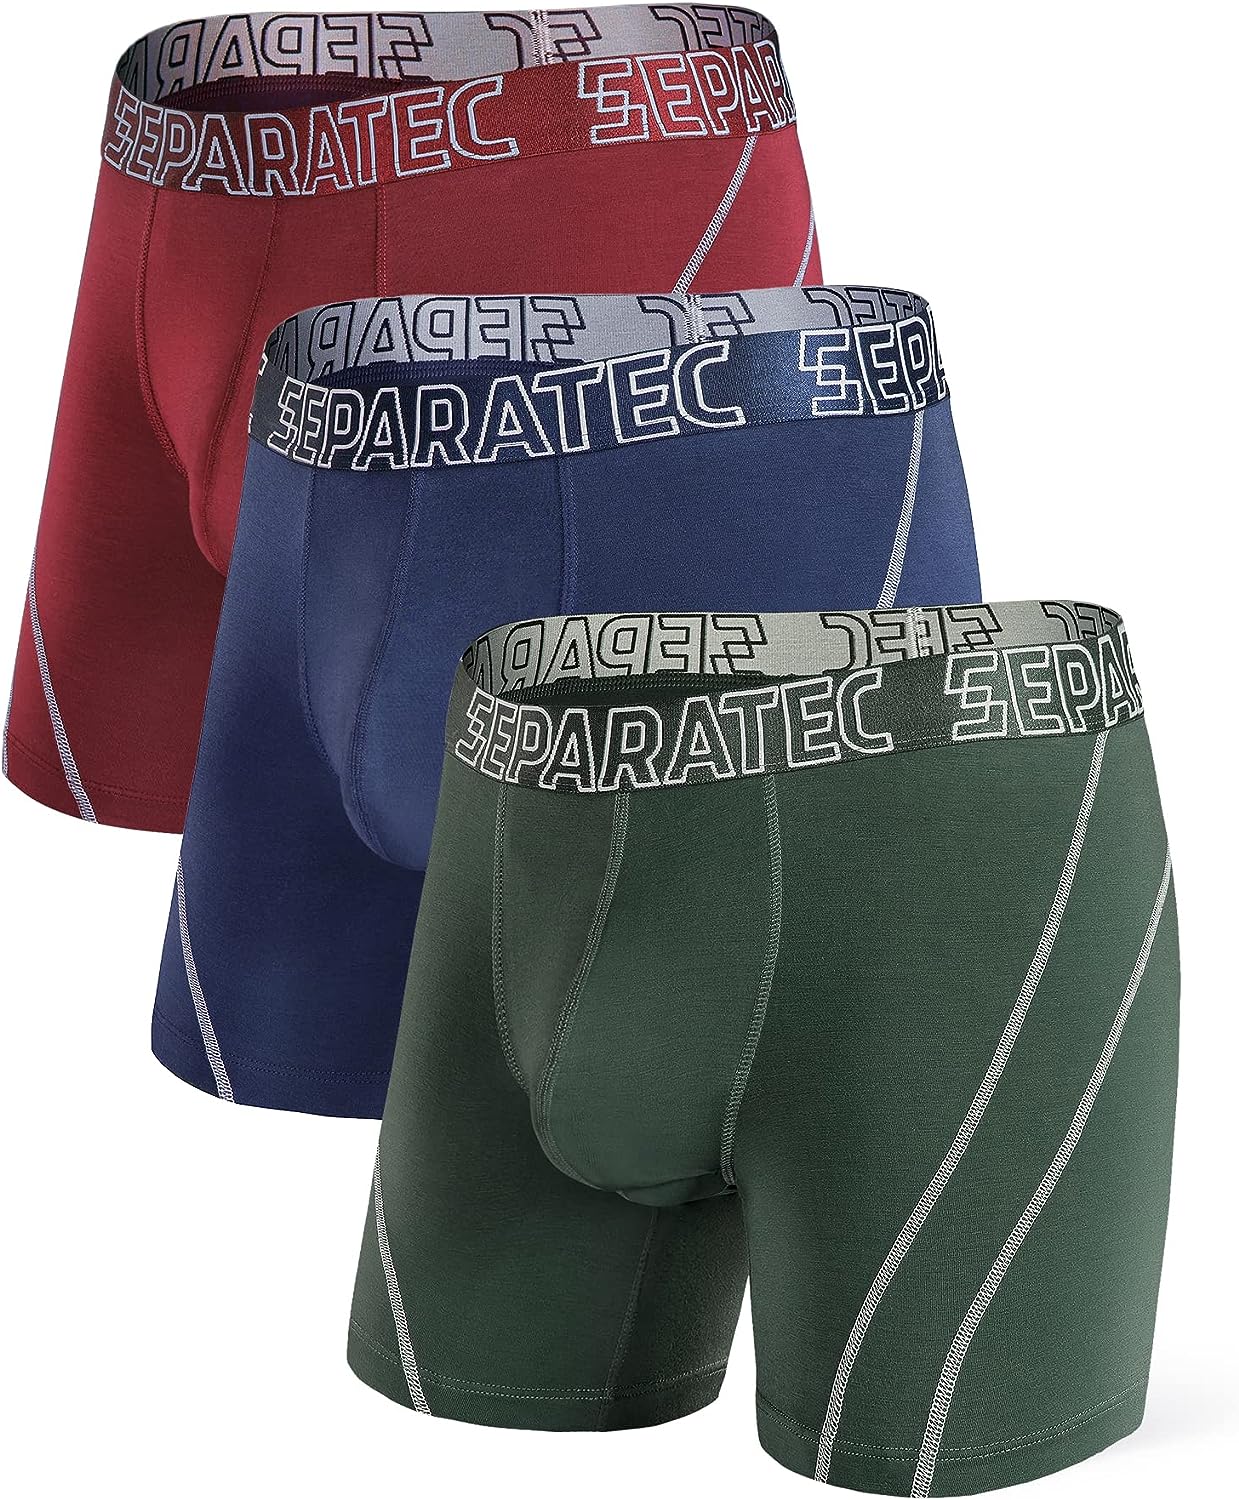 Separatec Bamboo Men's Underwear Classic Soft Breathable Boxer Briefs with  Dual